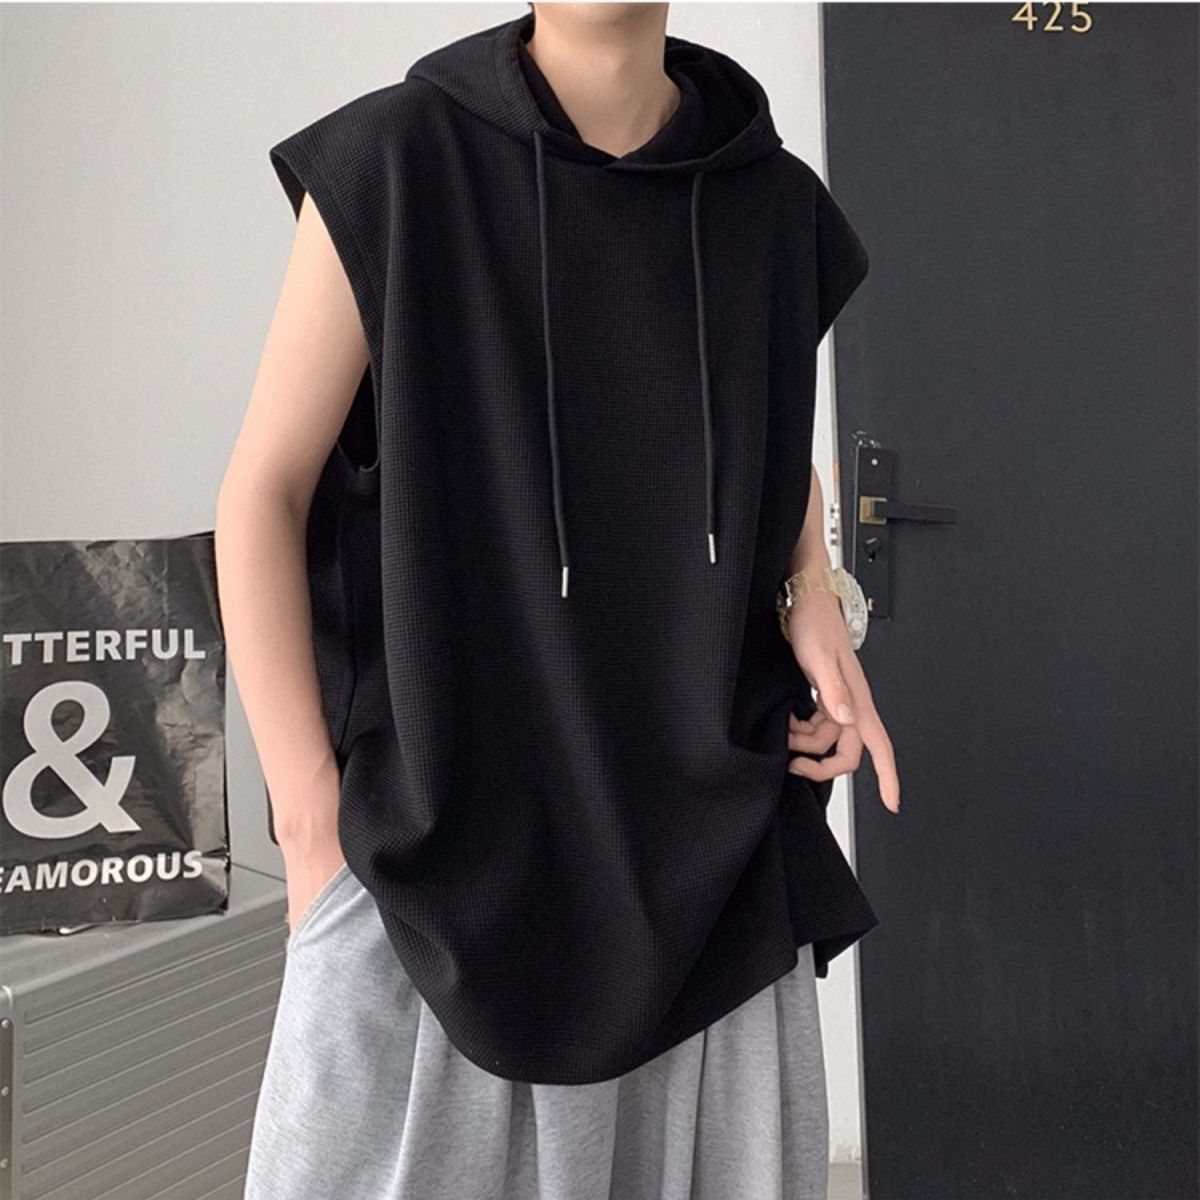 Summer Casual Pullover Shirt Tess Vest Men's Loose Cool Boy Versatile Sports Tops Solid Print Waffle Sleeveless Vest Hoodie